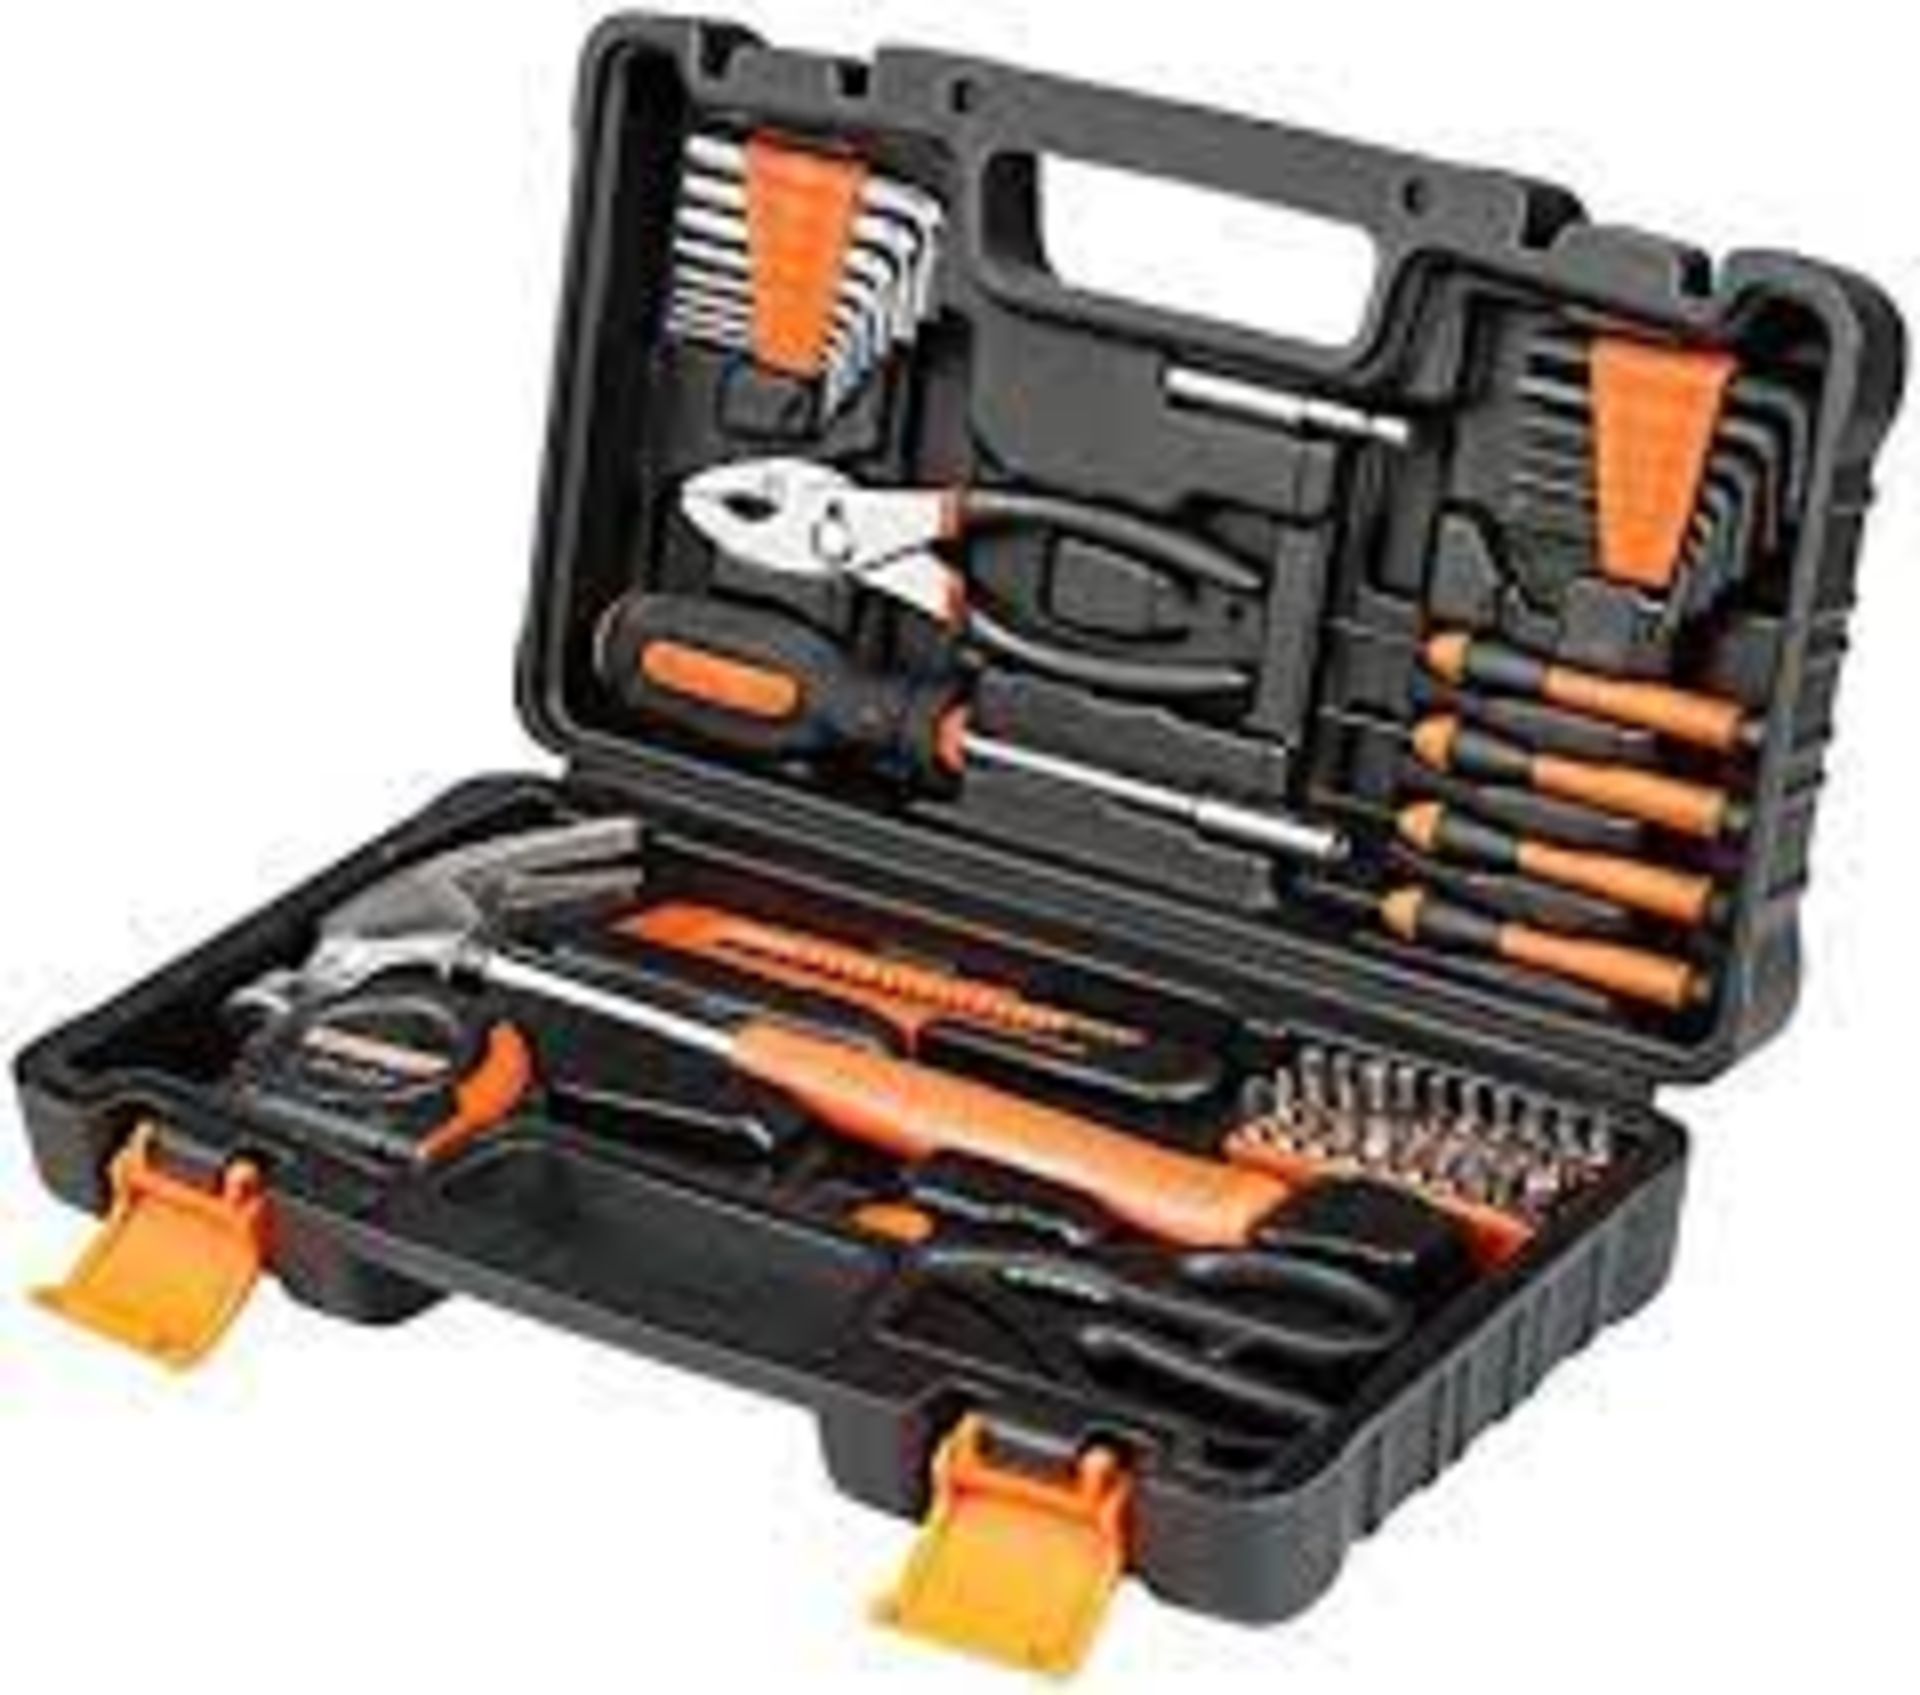 40 X NEW BOXED ENGiNDOT Home Tool Kit, 57-Piece Basic Tool kit with Storage Case. (ROW 10) HANDY FOR